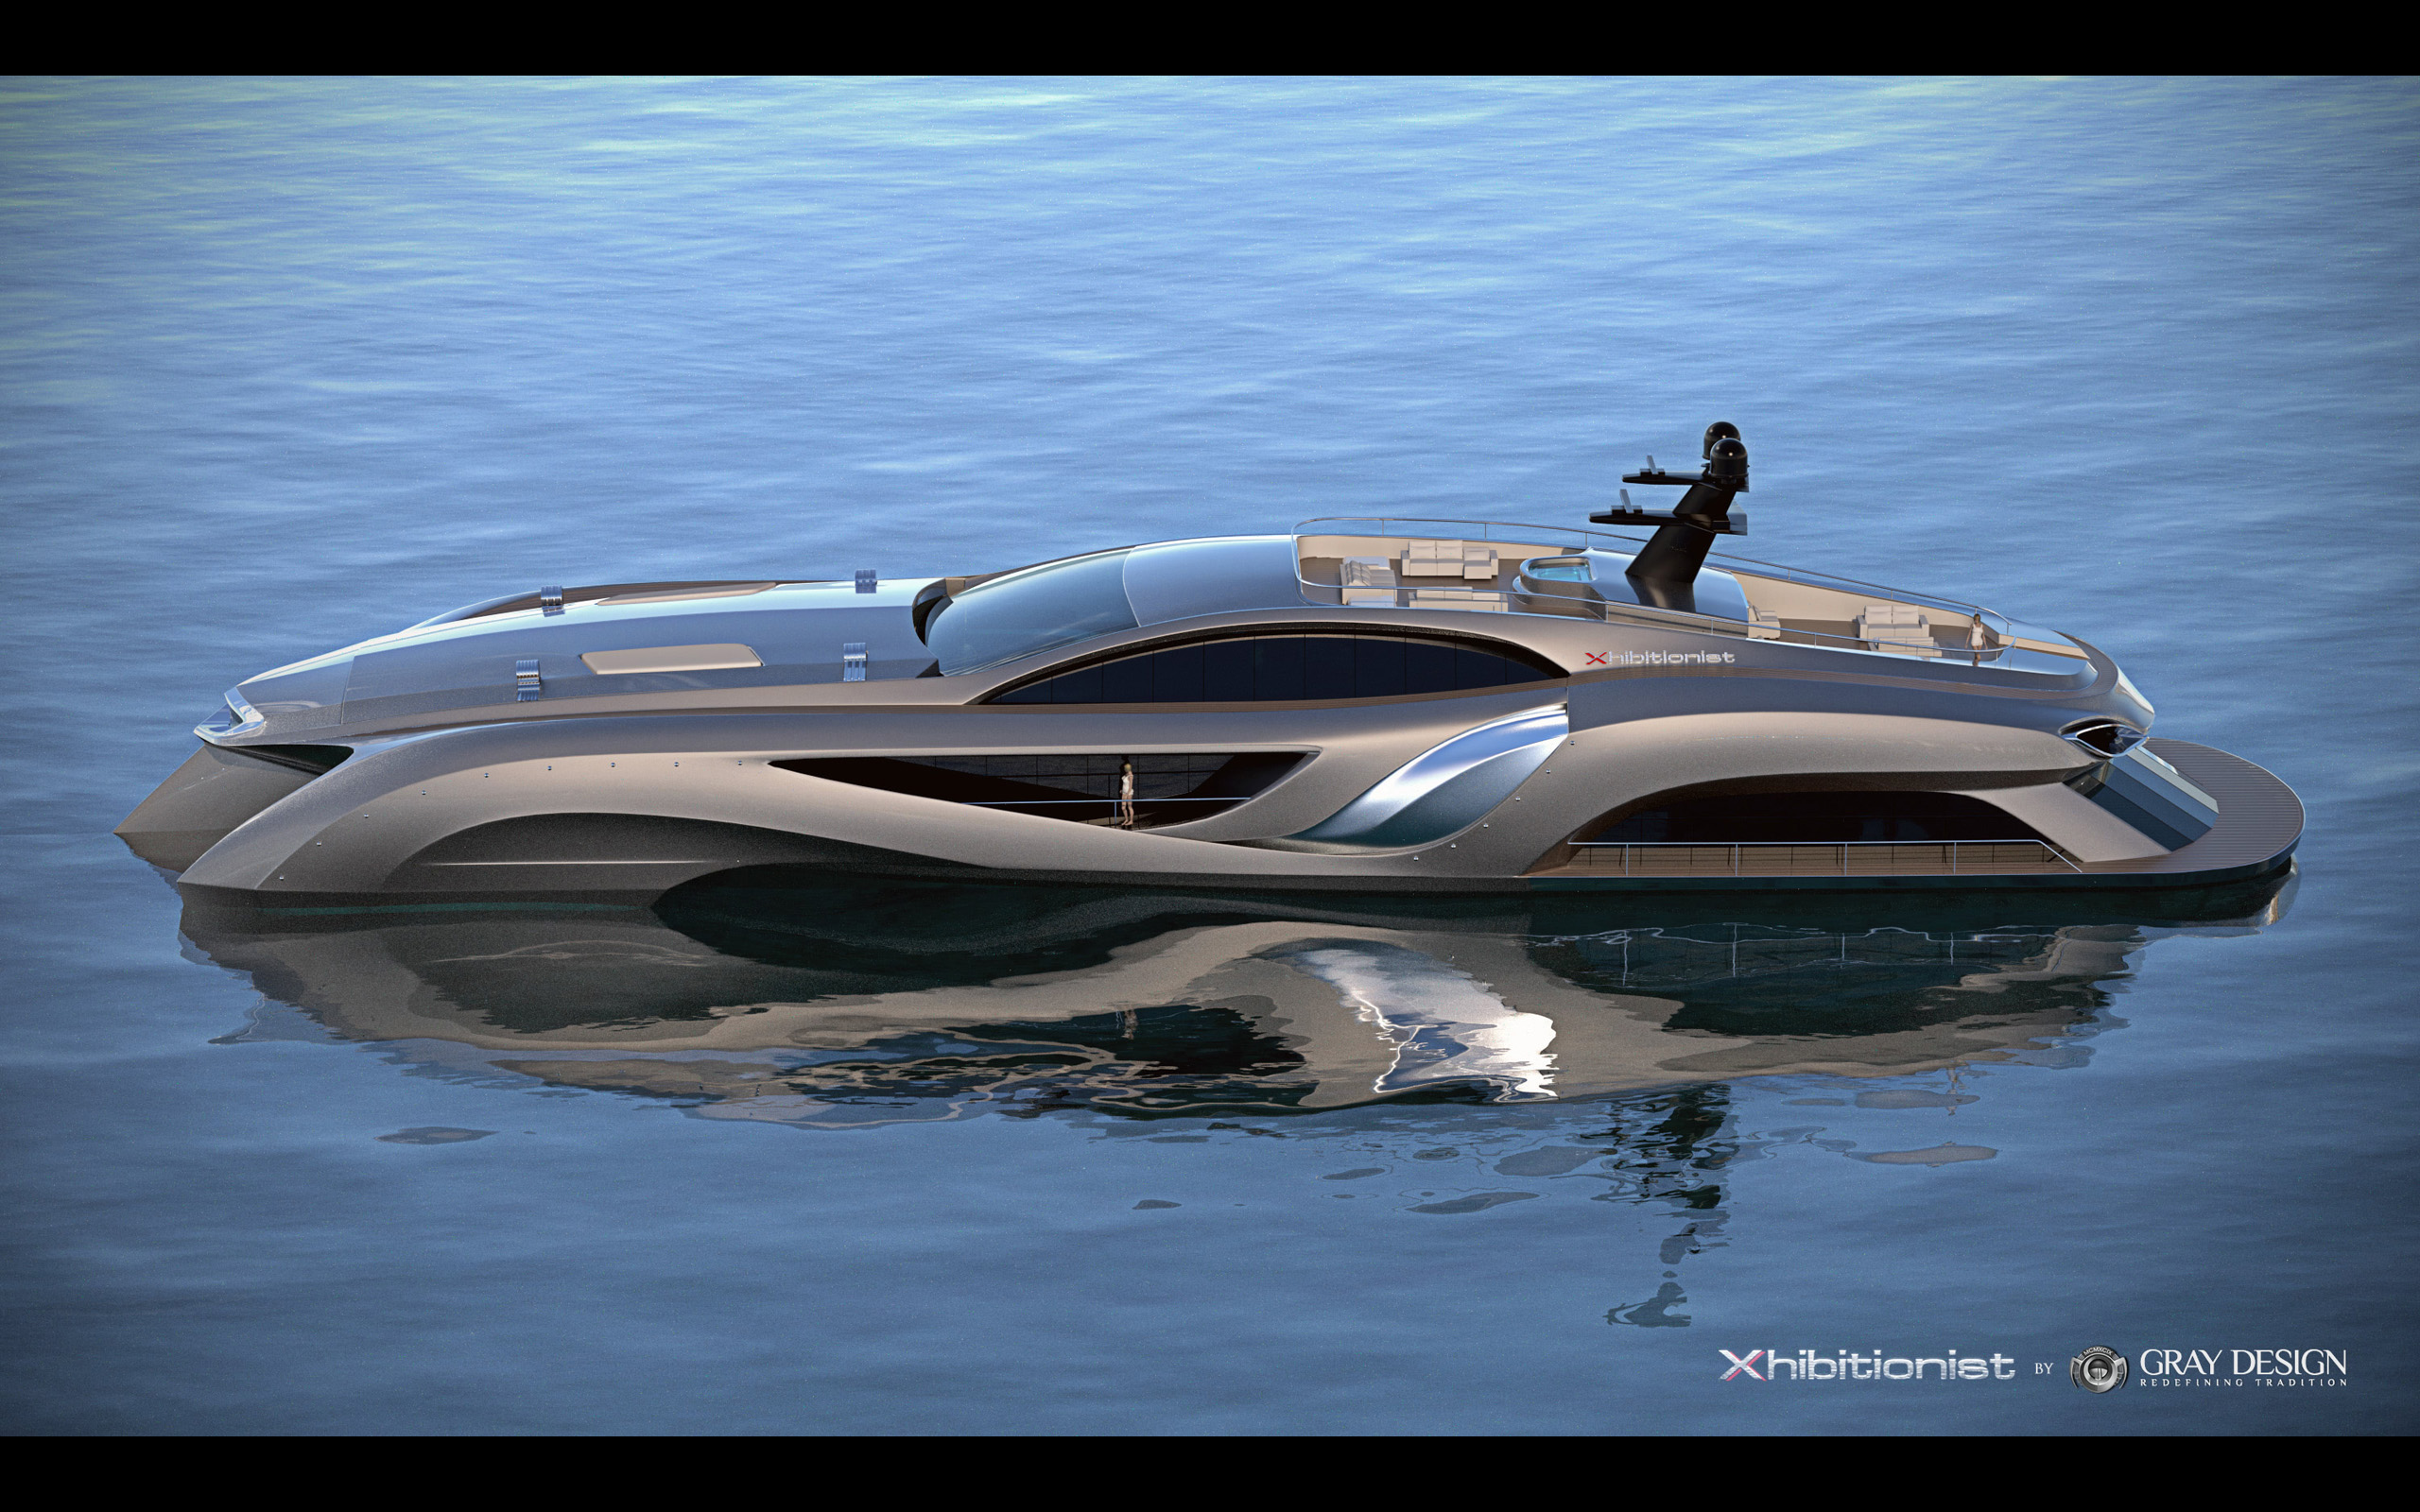 2013, Gray, Design, Strand, Craft, 166, Xhibitionist, Yacht, Concept, Boat, Boats, Ship, Ships, Luxury, Ge Wallpaper